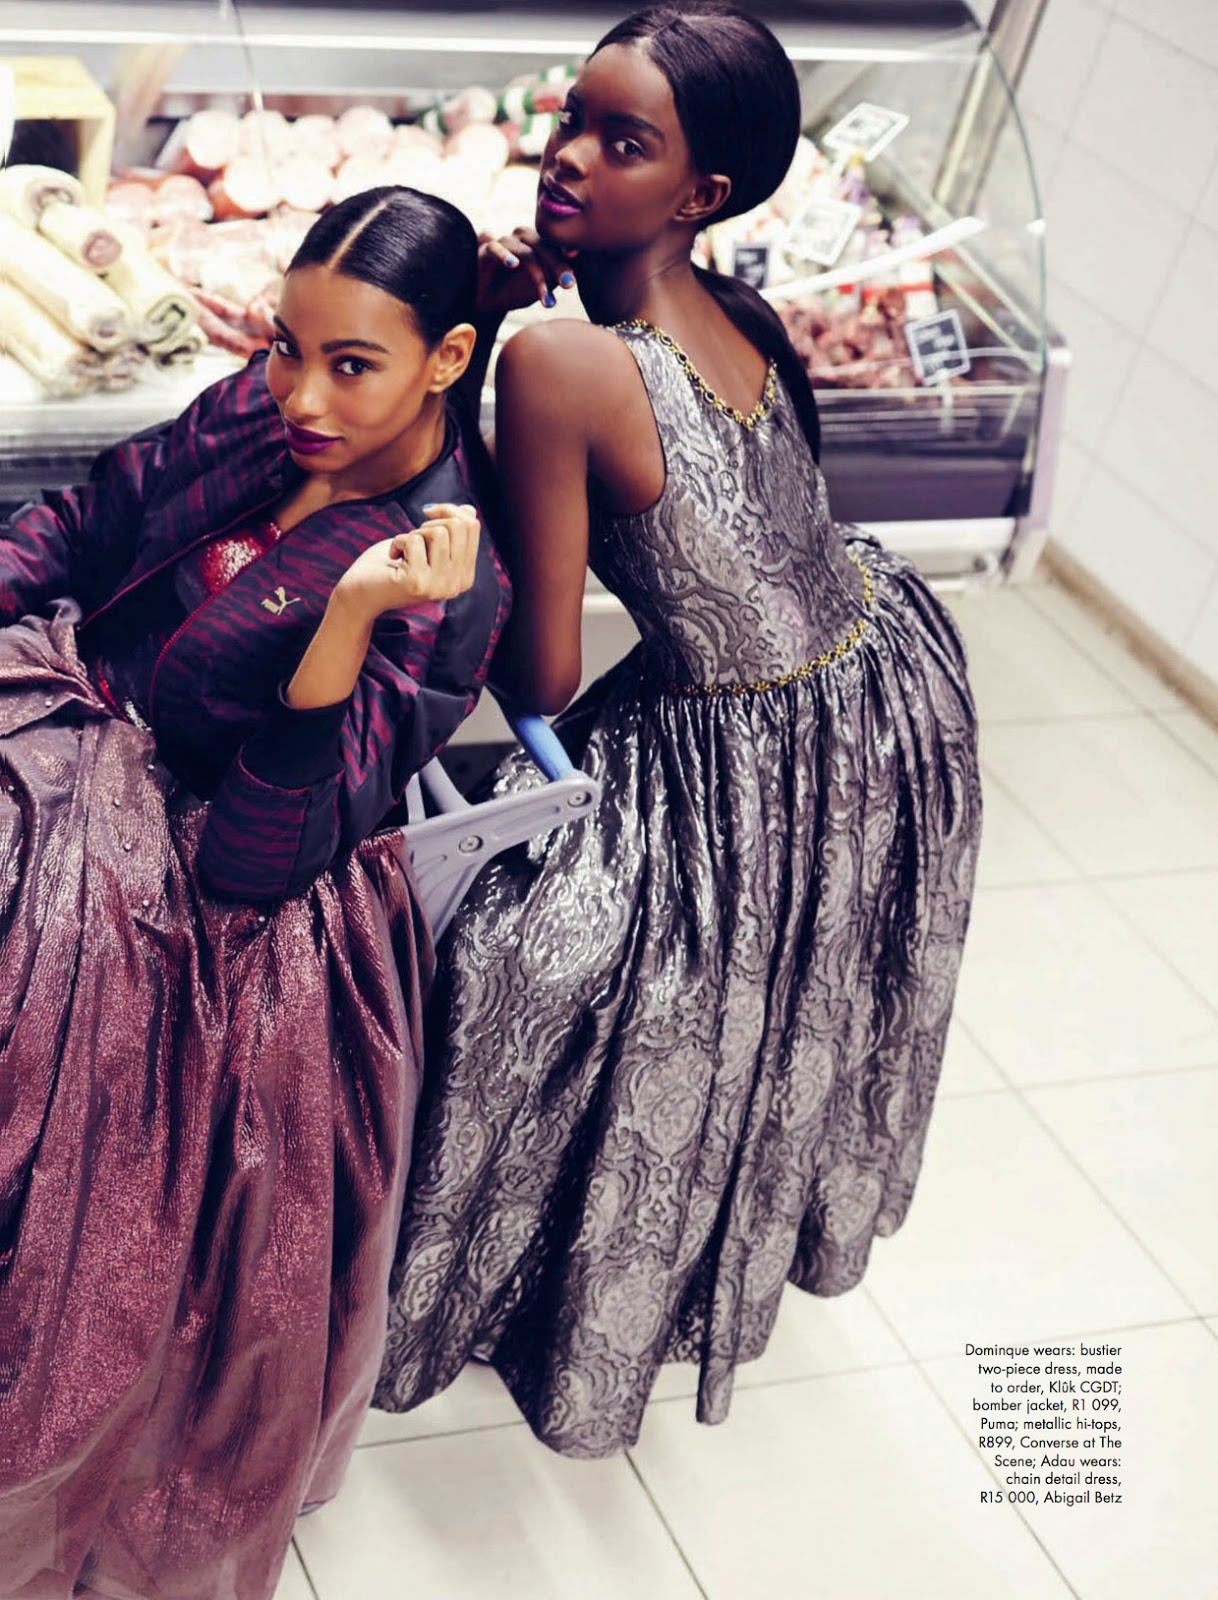 leahcultice:</p>
<p>Dominique &amp; Adau Mornyang by Damon Fourie for Elle South Africa July 2014<br />
